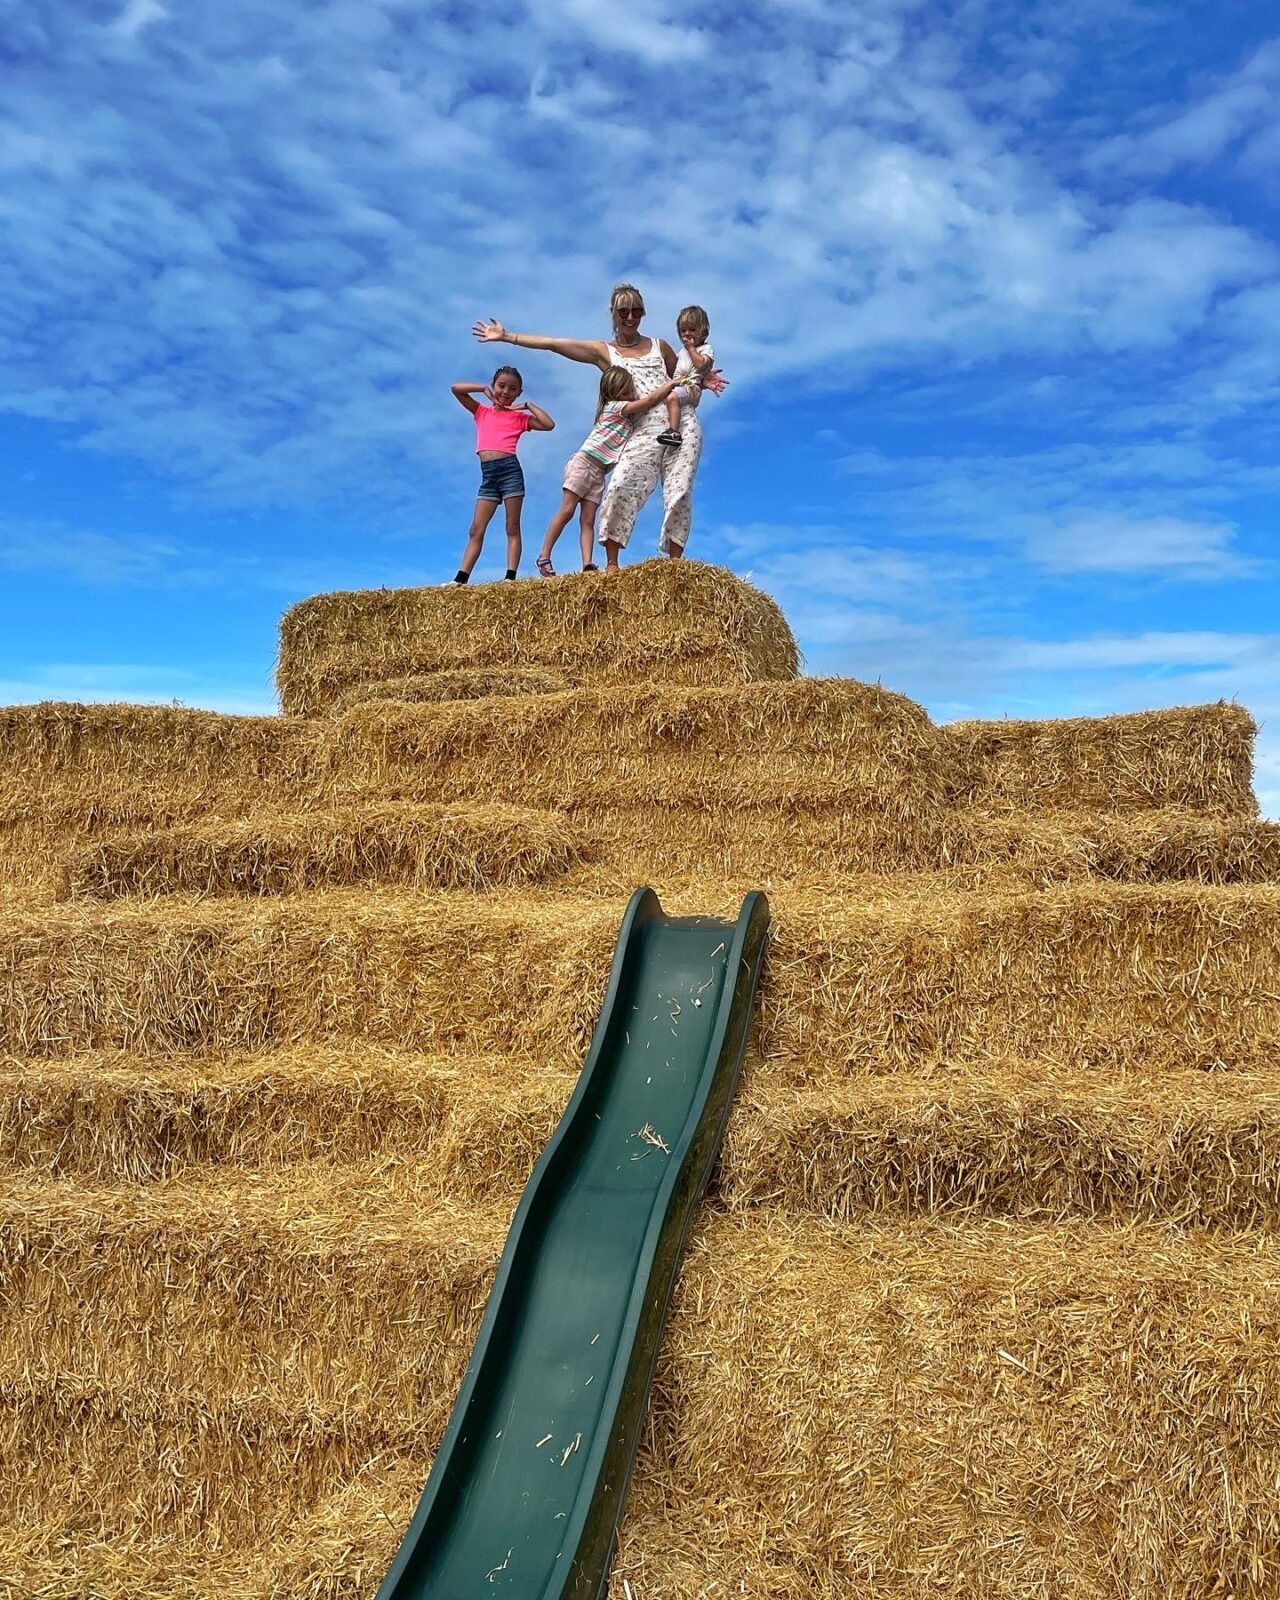 Straw mountain at Barleymows near Chard - places to visit in Somerset